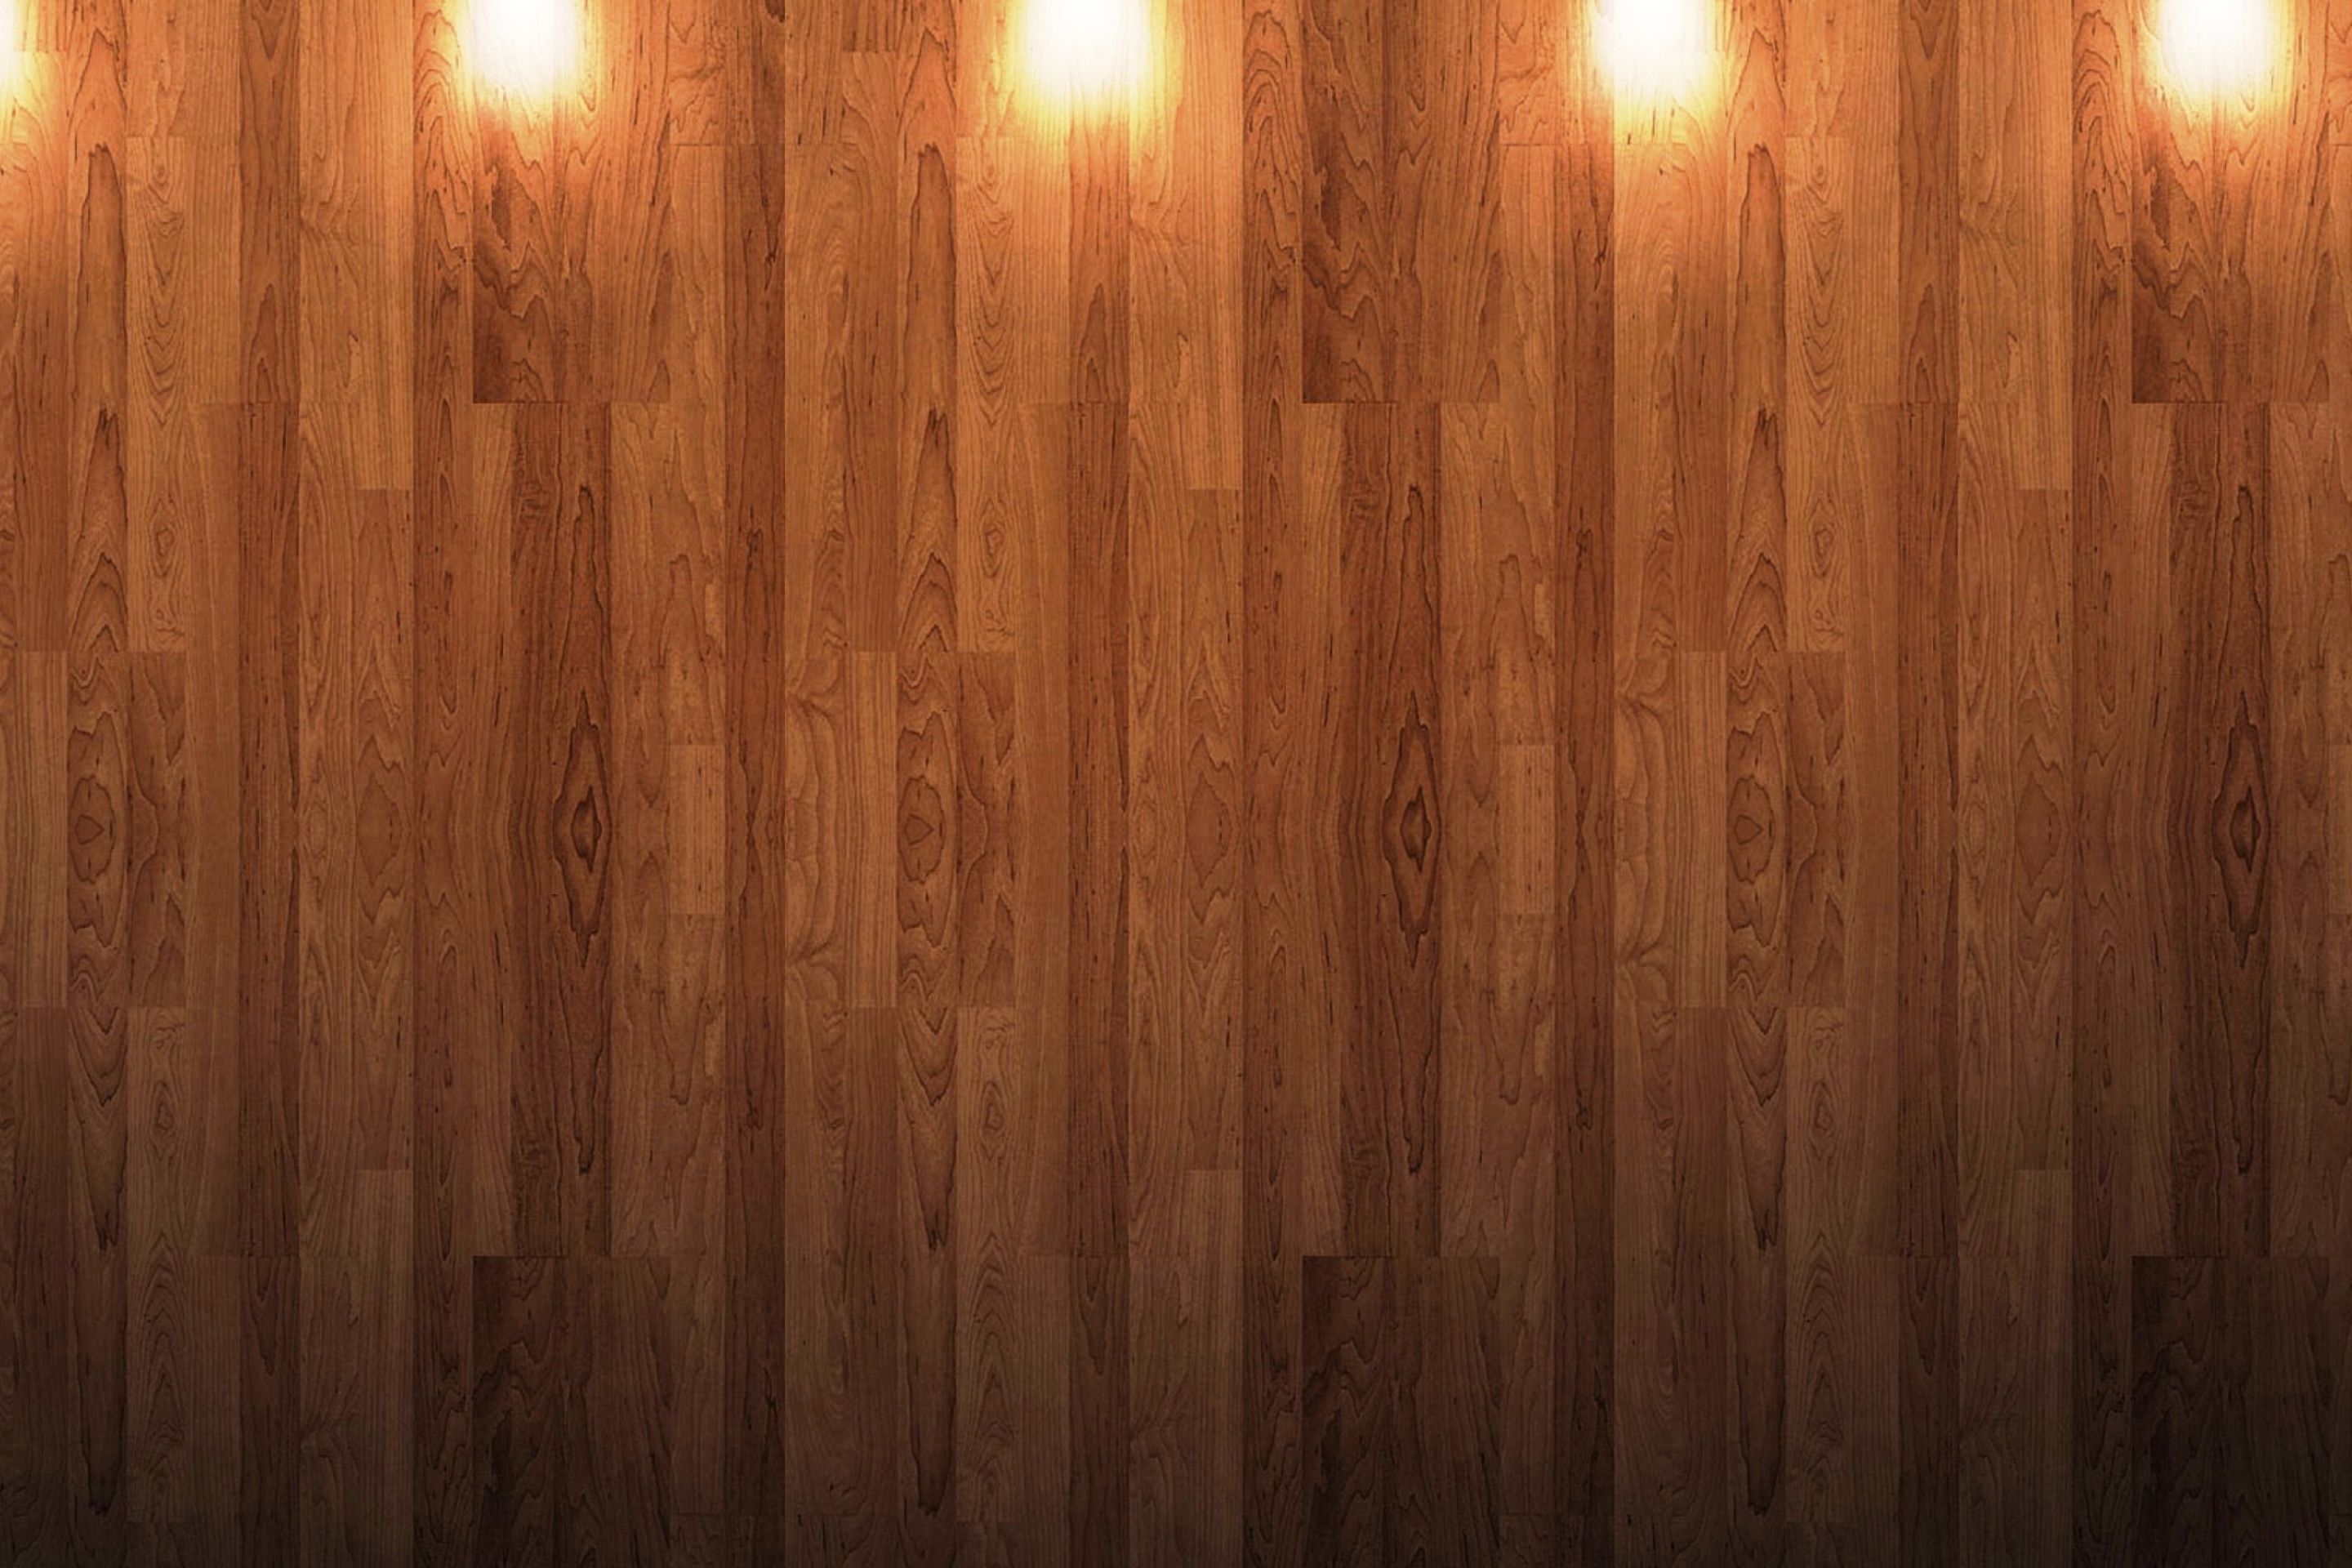 Simple and Beautifull Wood Texture wallpaper 2880x1920